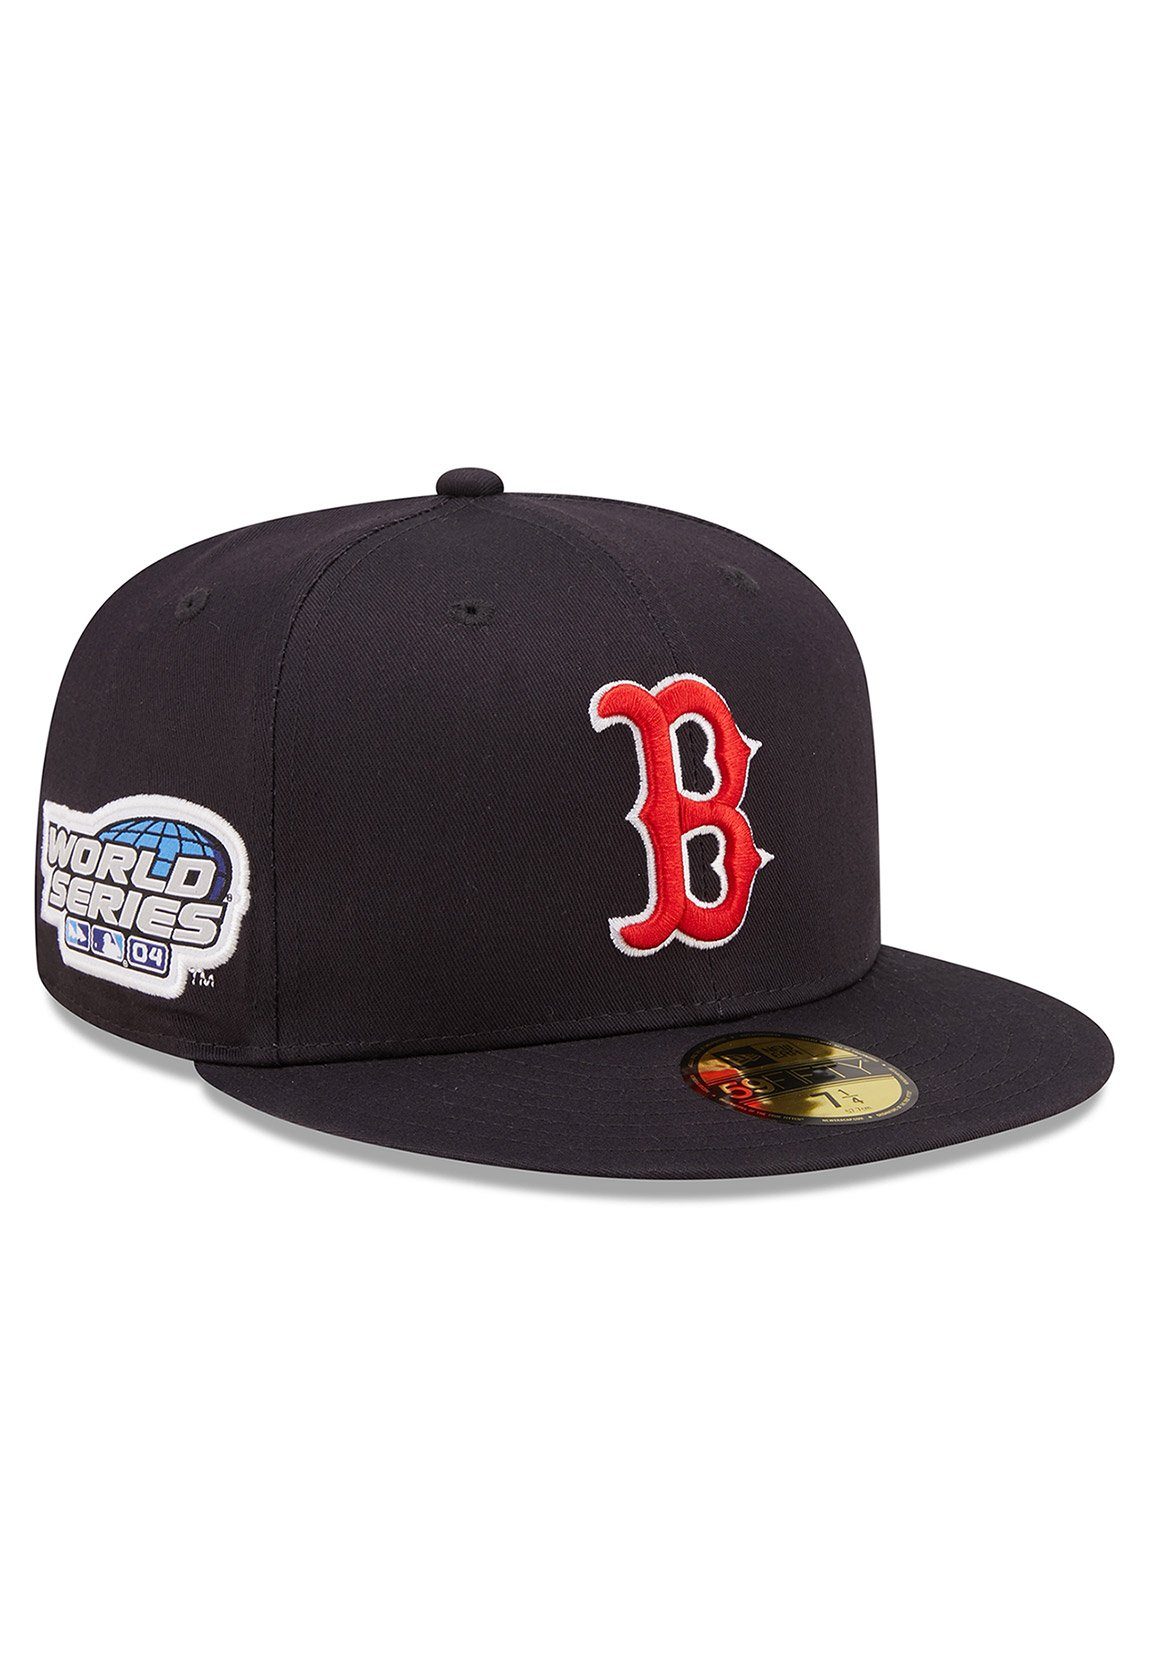 New Era Fitted Cap BOSTON New Cap Patch 59Fifty Dunkelblau SOX Side RED